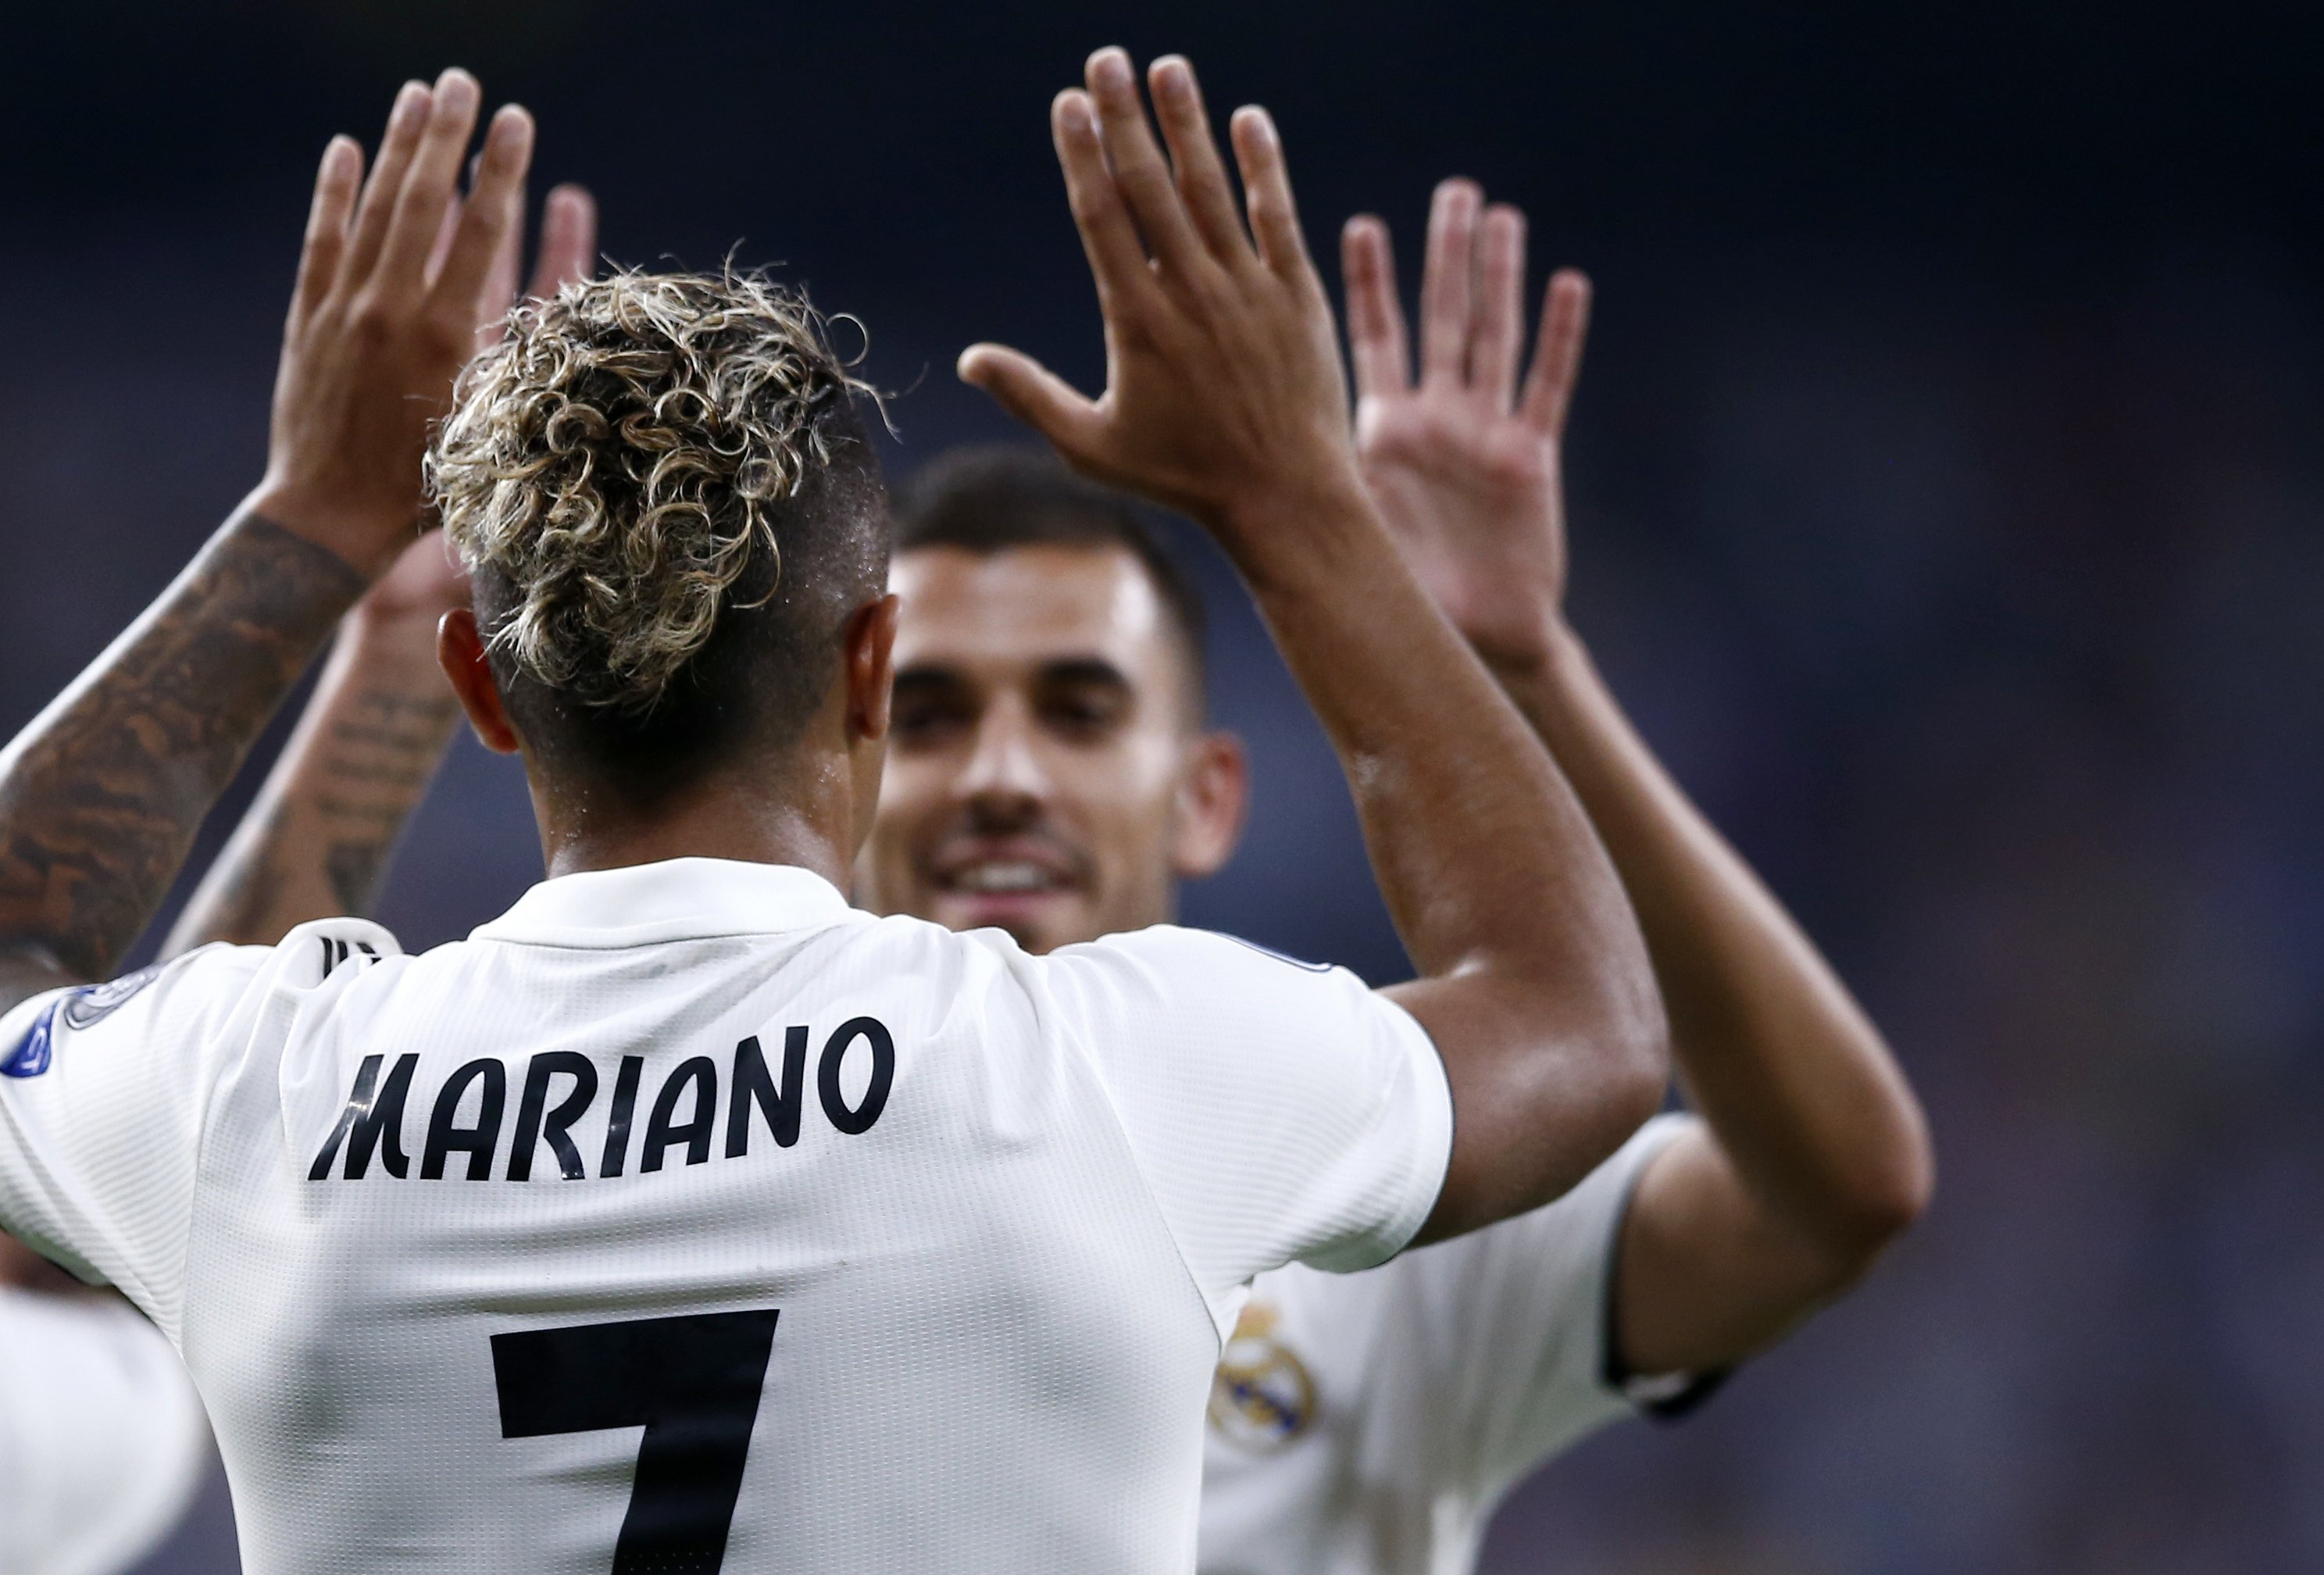 Mariano, the Man Bought to Replace Cristiano Ronaldo as Real Madrid's No. 7, News, Scores, Highlights, Stats, and Rumors